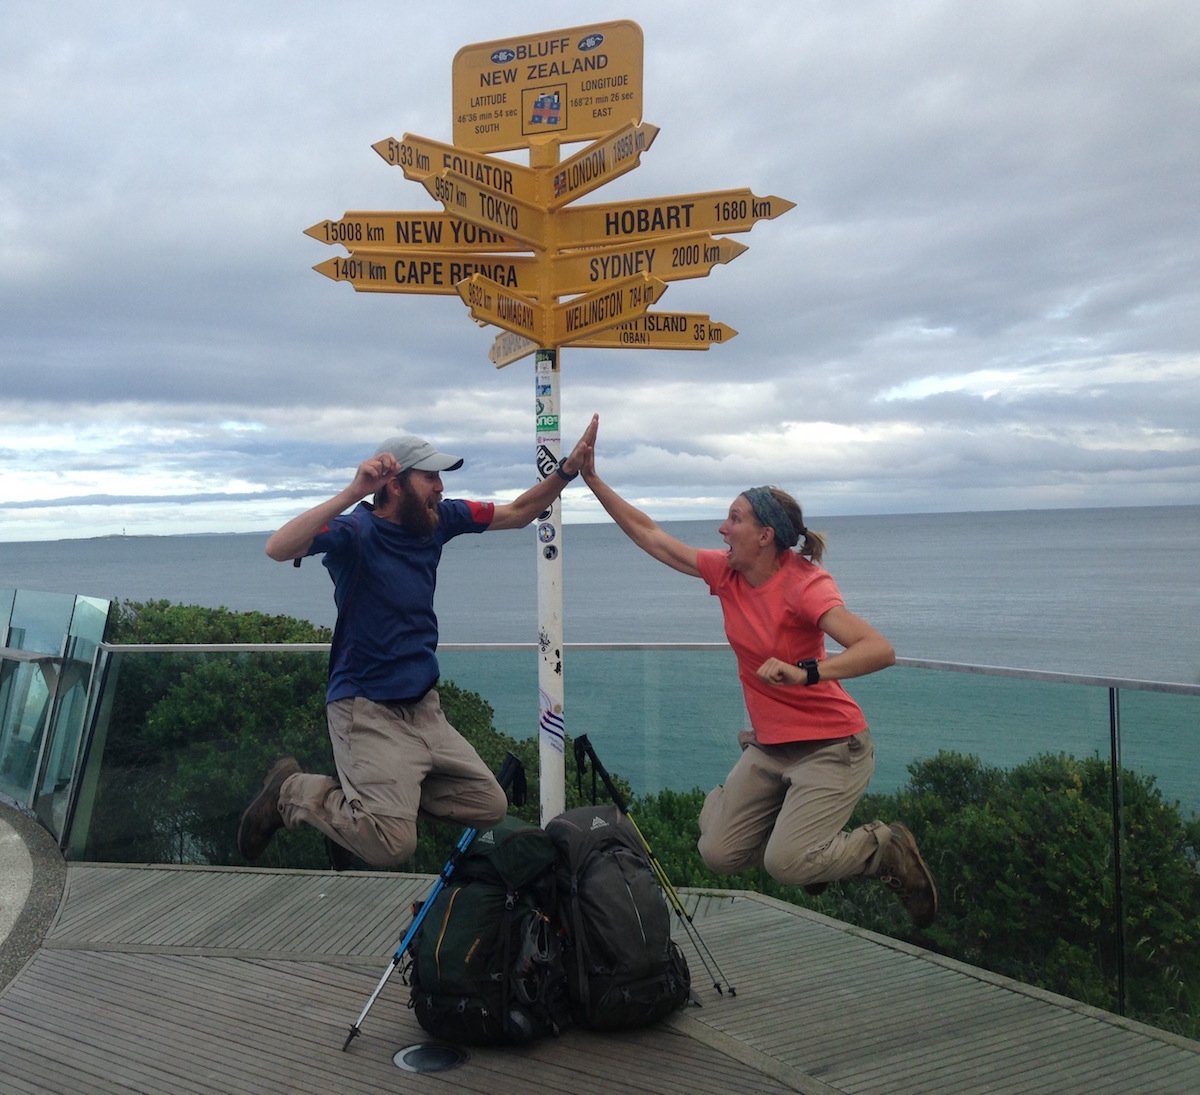 We really splurged on our thru hike across New Zealand because … well, it’s New Zealand!